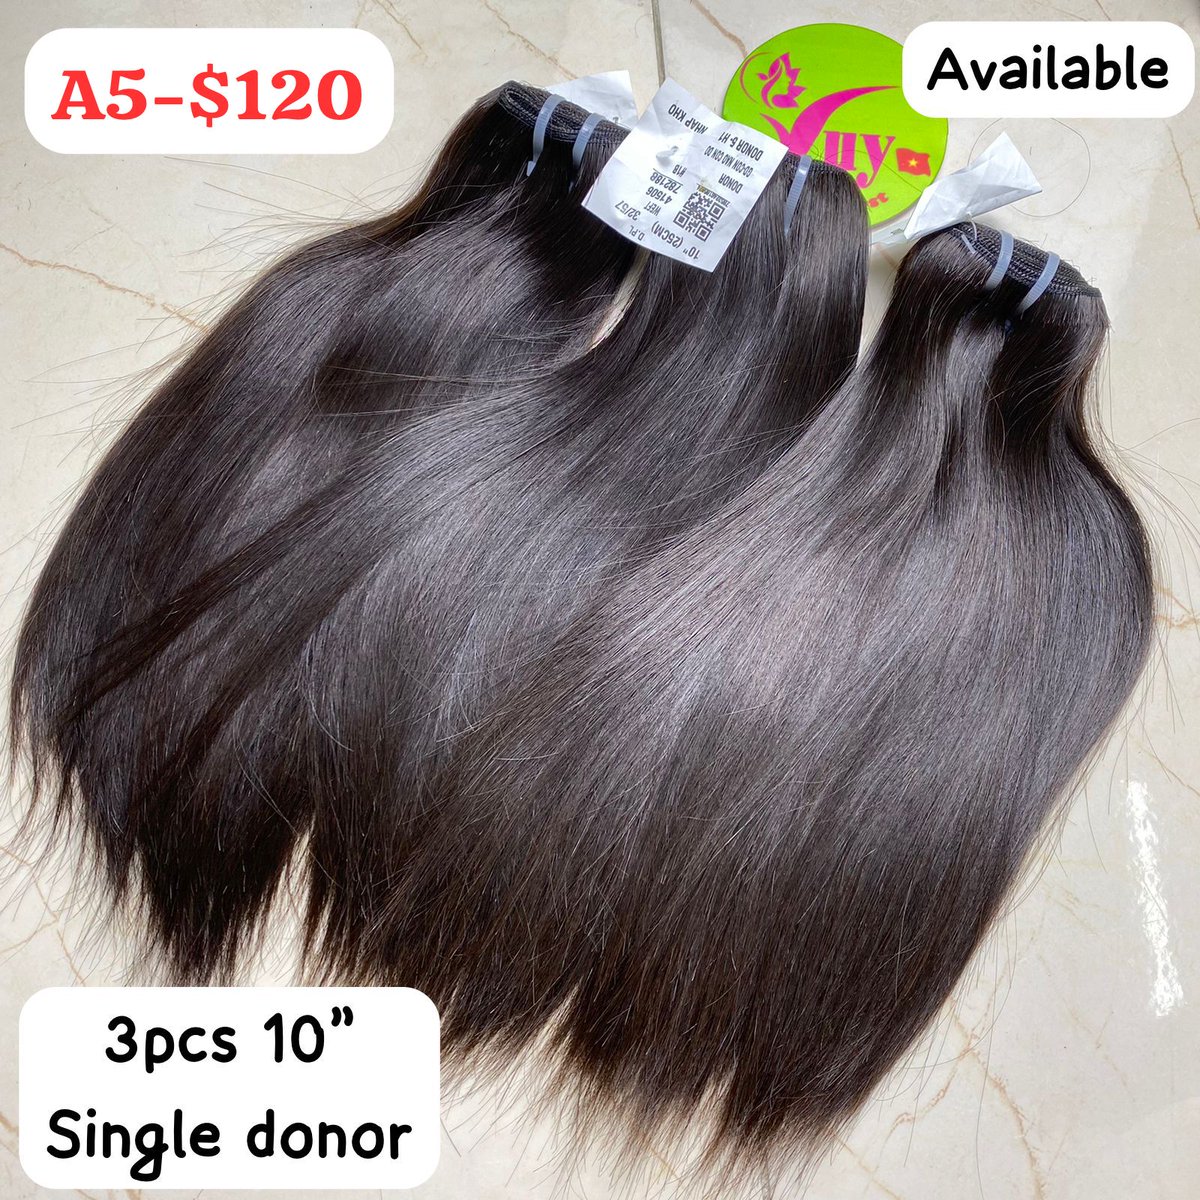 If you’re looking for high quality Single Donor hair, you’ve come to the right place😍 Contact with me on whatsapp +84396092128 #vuyhairvietnam #vietnamhairfactory #beautiful #bundlesdeal #hairsupplier #hairstylist #wholesalehairsuppliers #humanhairextensionsforsale